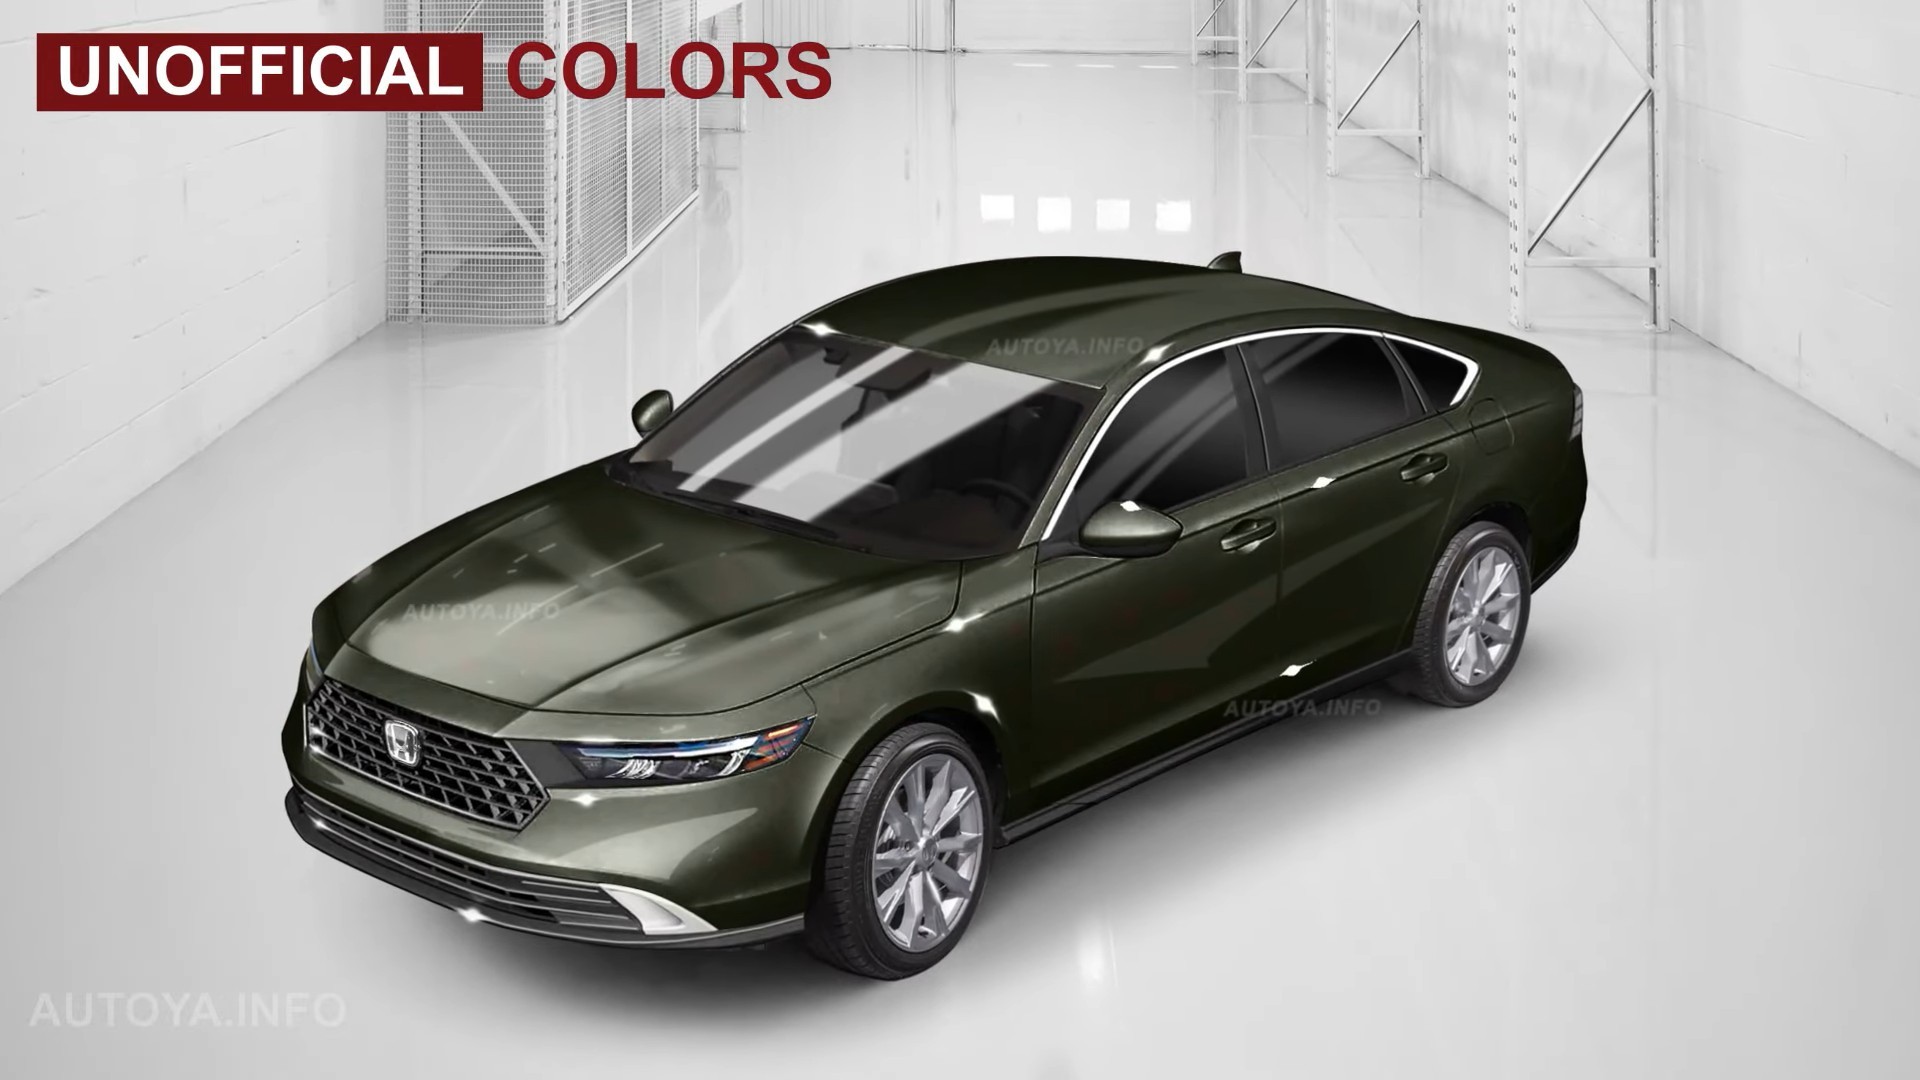 2024 Honda Accord Flaunts Mature CGI Design Along With Ritzy Color Choices autoevolution